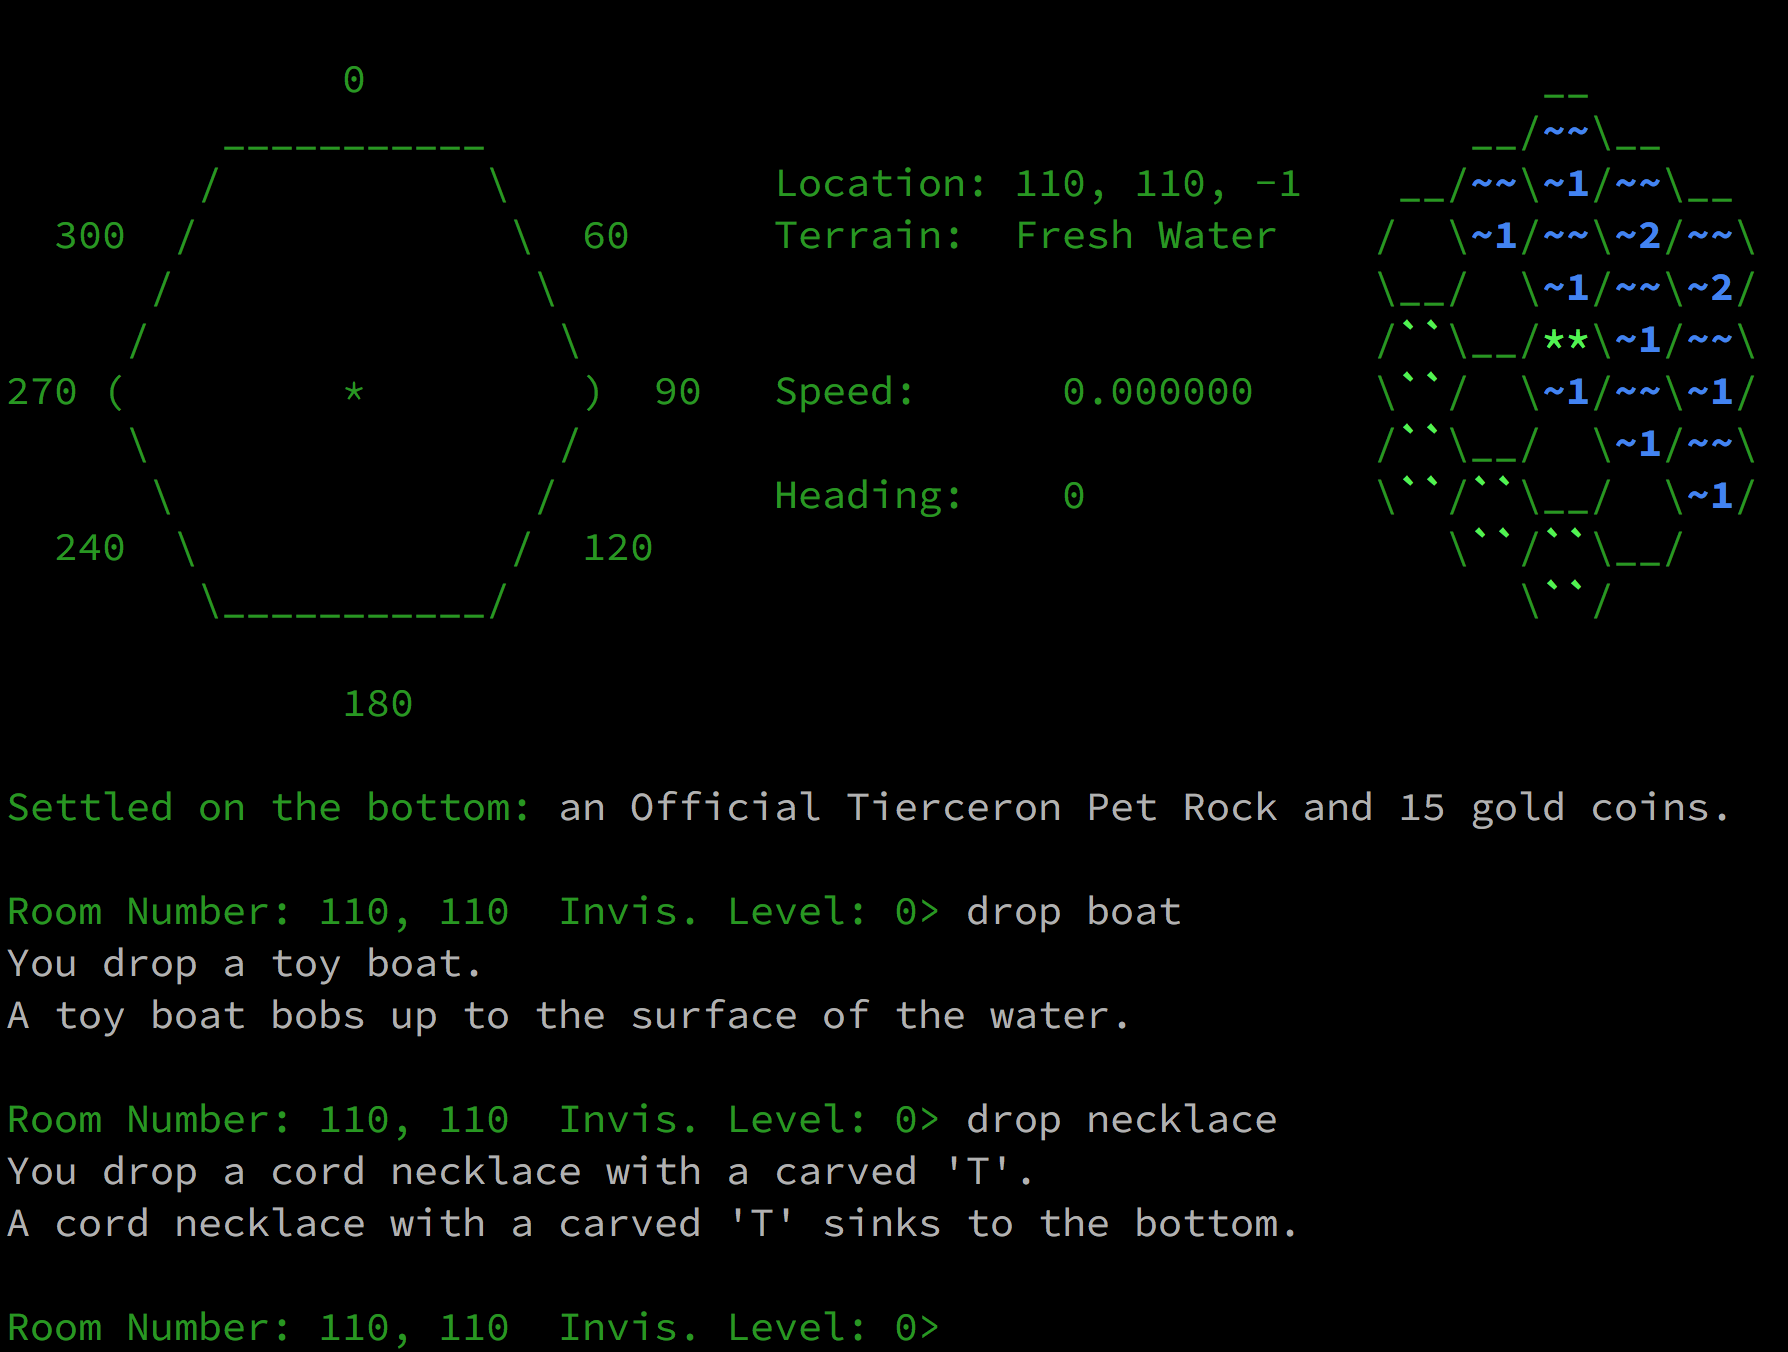 Screenshot of Covenant MUD gameplay. A toy boat is dropped into the water and floats. A necklace is dropped into the water and settles on the bottom.